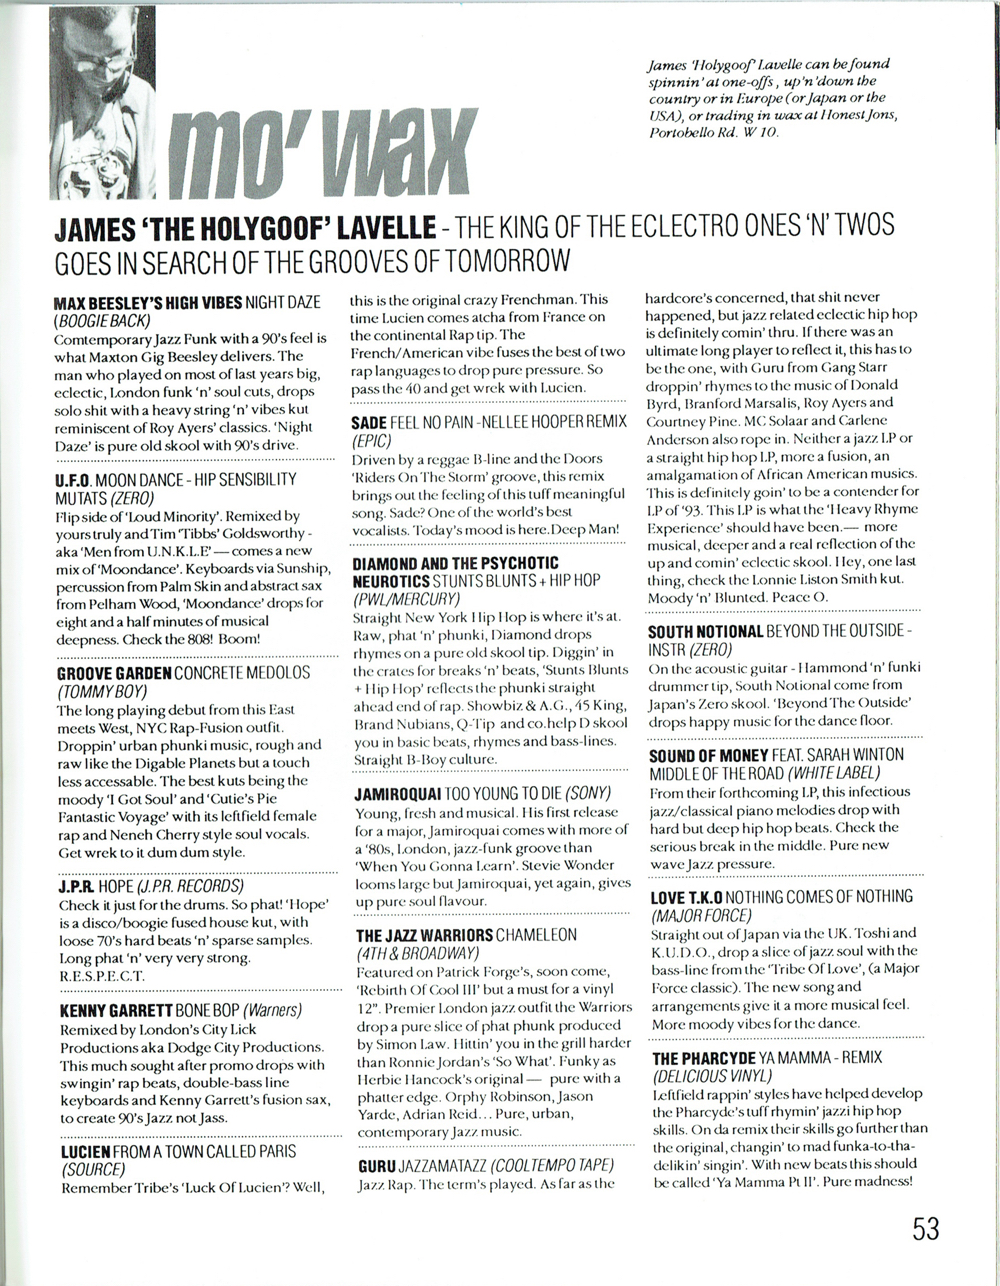 Mo' Wax in issue 20 p53